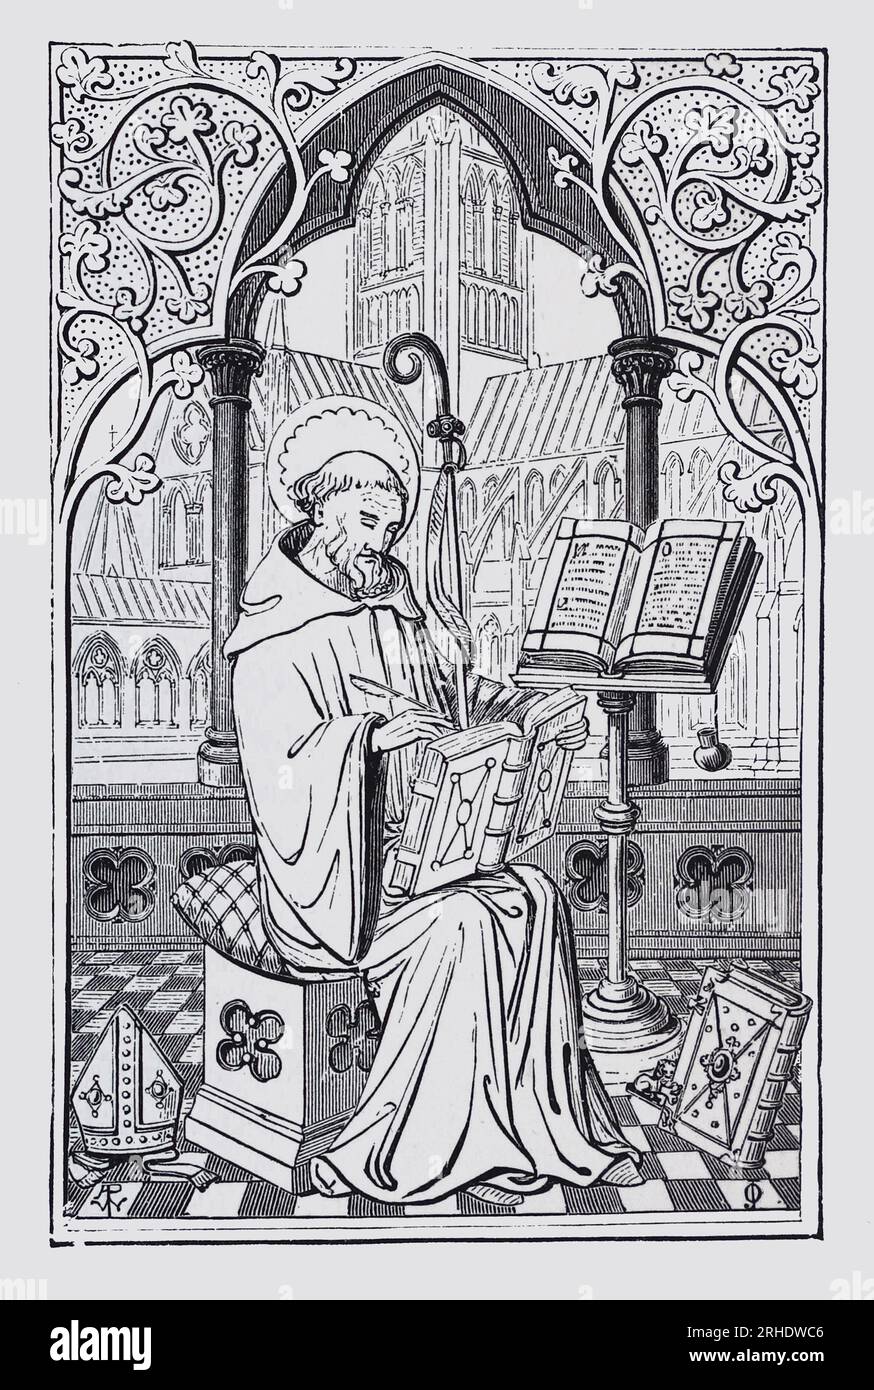 St Stephen Harding after a drawing by Augustus Welby Northmore Pugin. He was an English-born monk and abbot, who was one of the founders of the Cistercian Order. Engraving from Lives of the Saints by Sabin Baring-Gould. Stock Photo